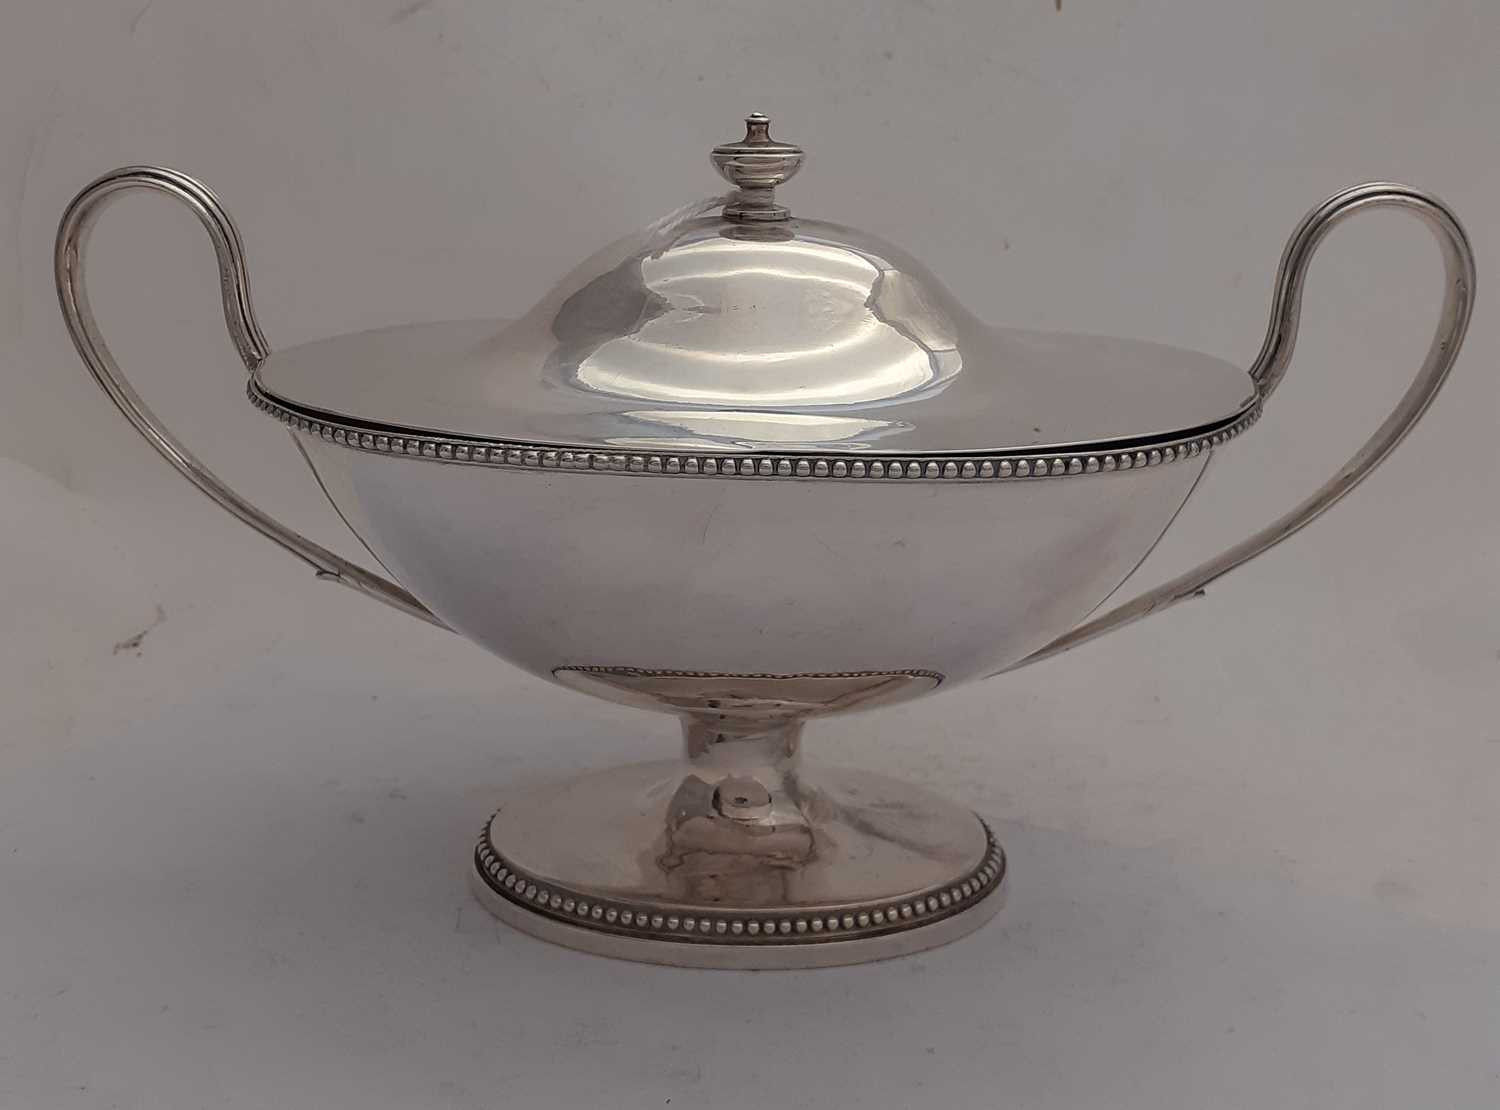 A Pair of George III Silver Sauce-Tureens and Covers, by Robert Hennell, London, 1782 - Image 5 of 17